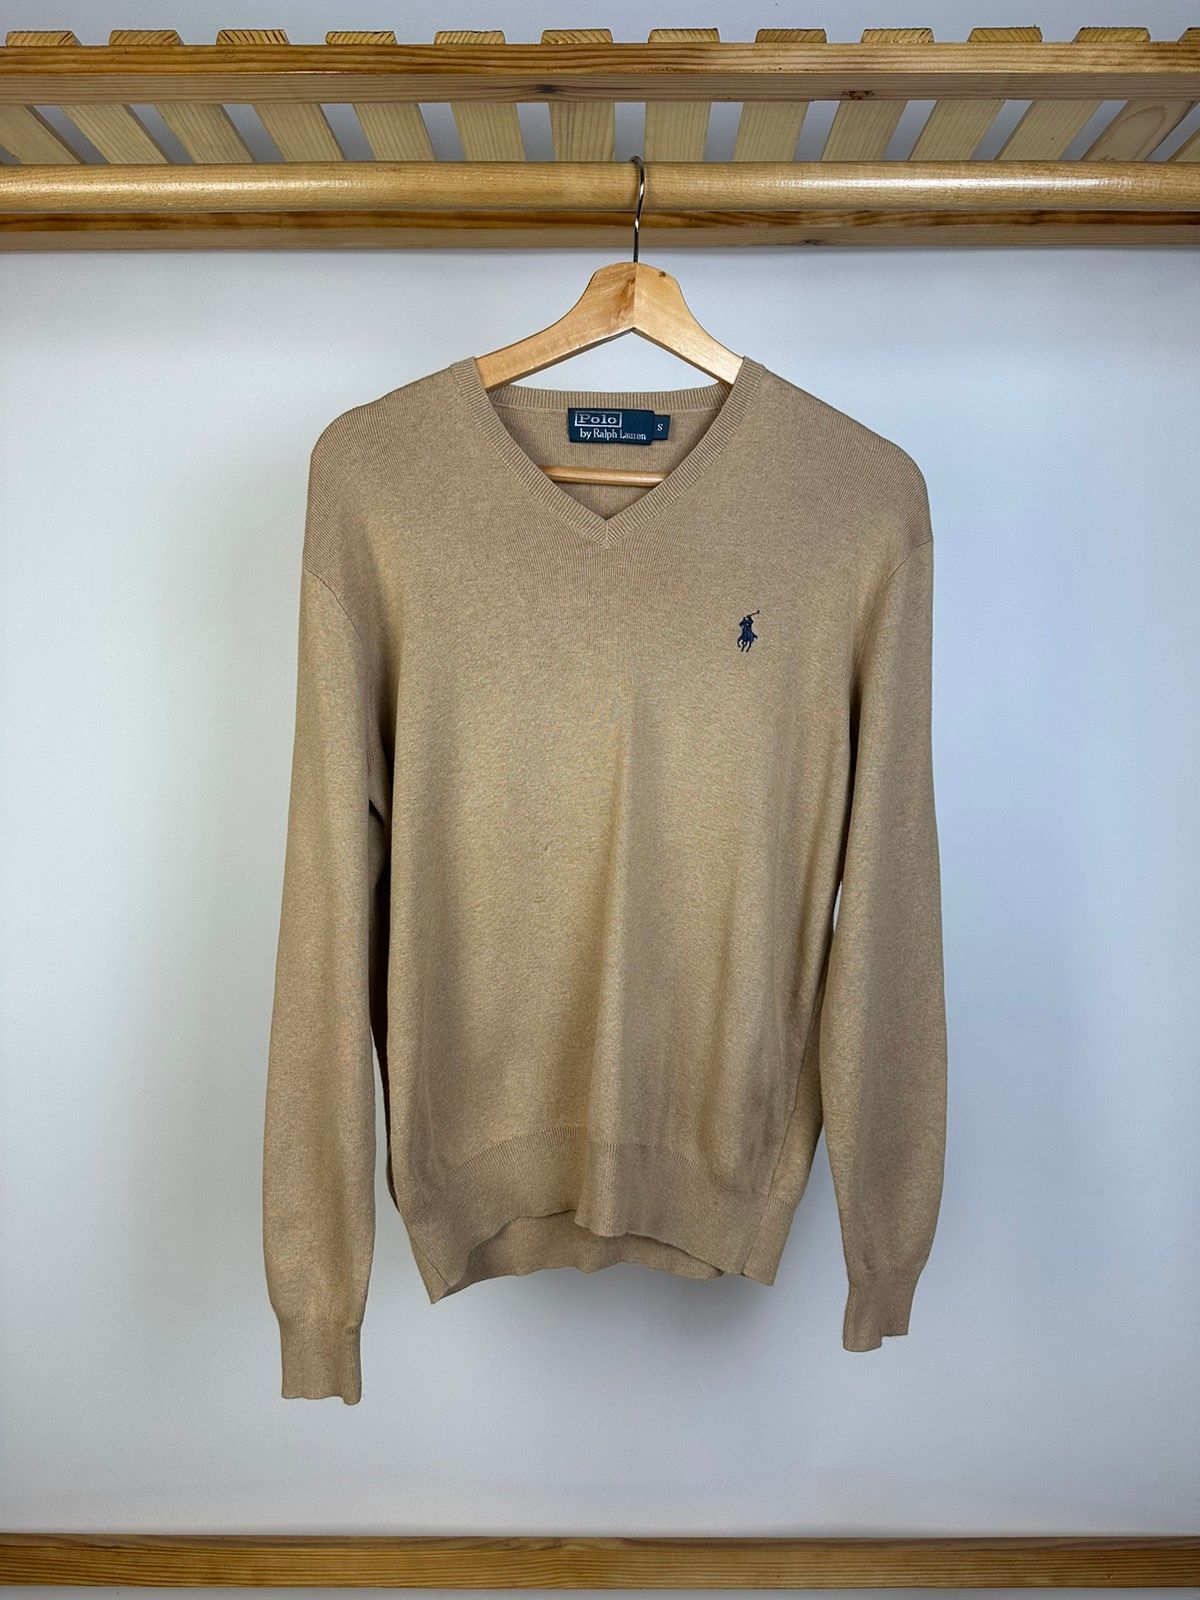 Pre-owned Cardigan X Polo Ralph Lauren Polo Ralph Laurent Vintage Cardigan Sweater Vneck Knit Rrl In Beige